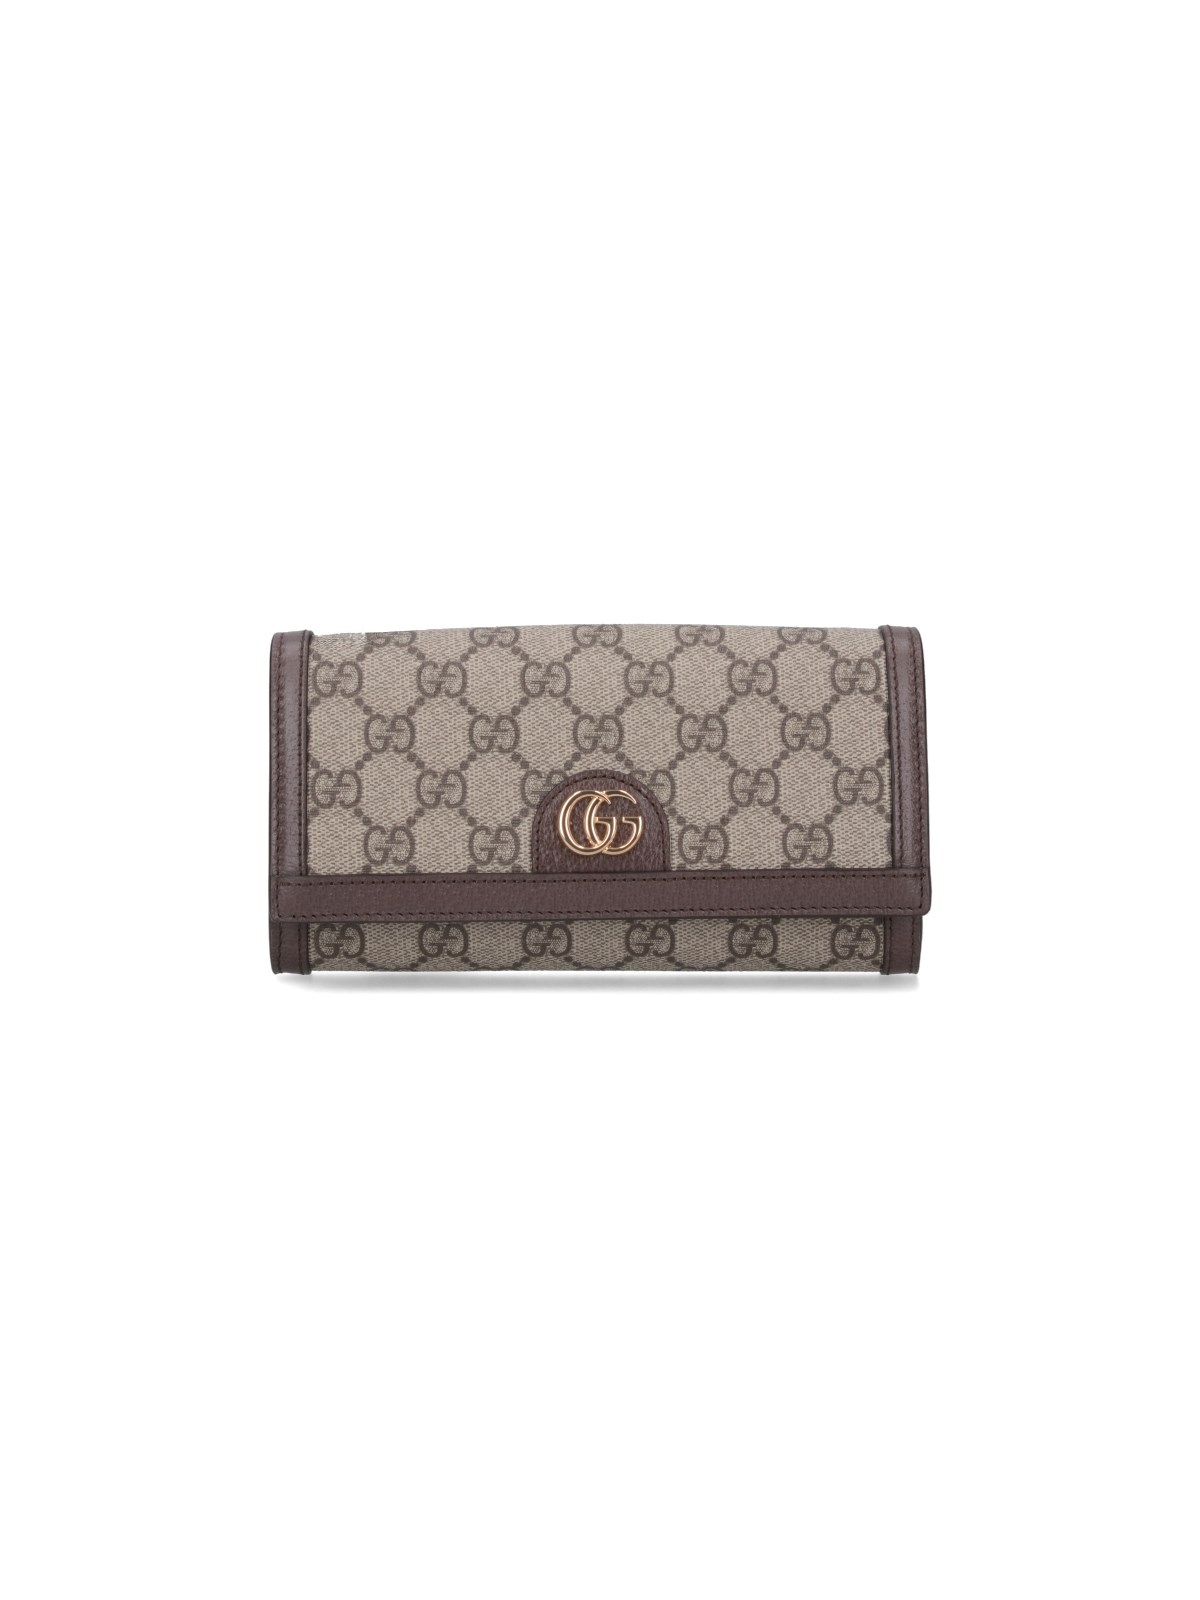 Gucci "ophidia" Wallet In Gray